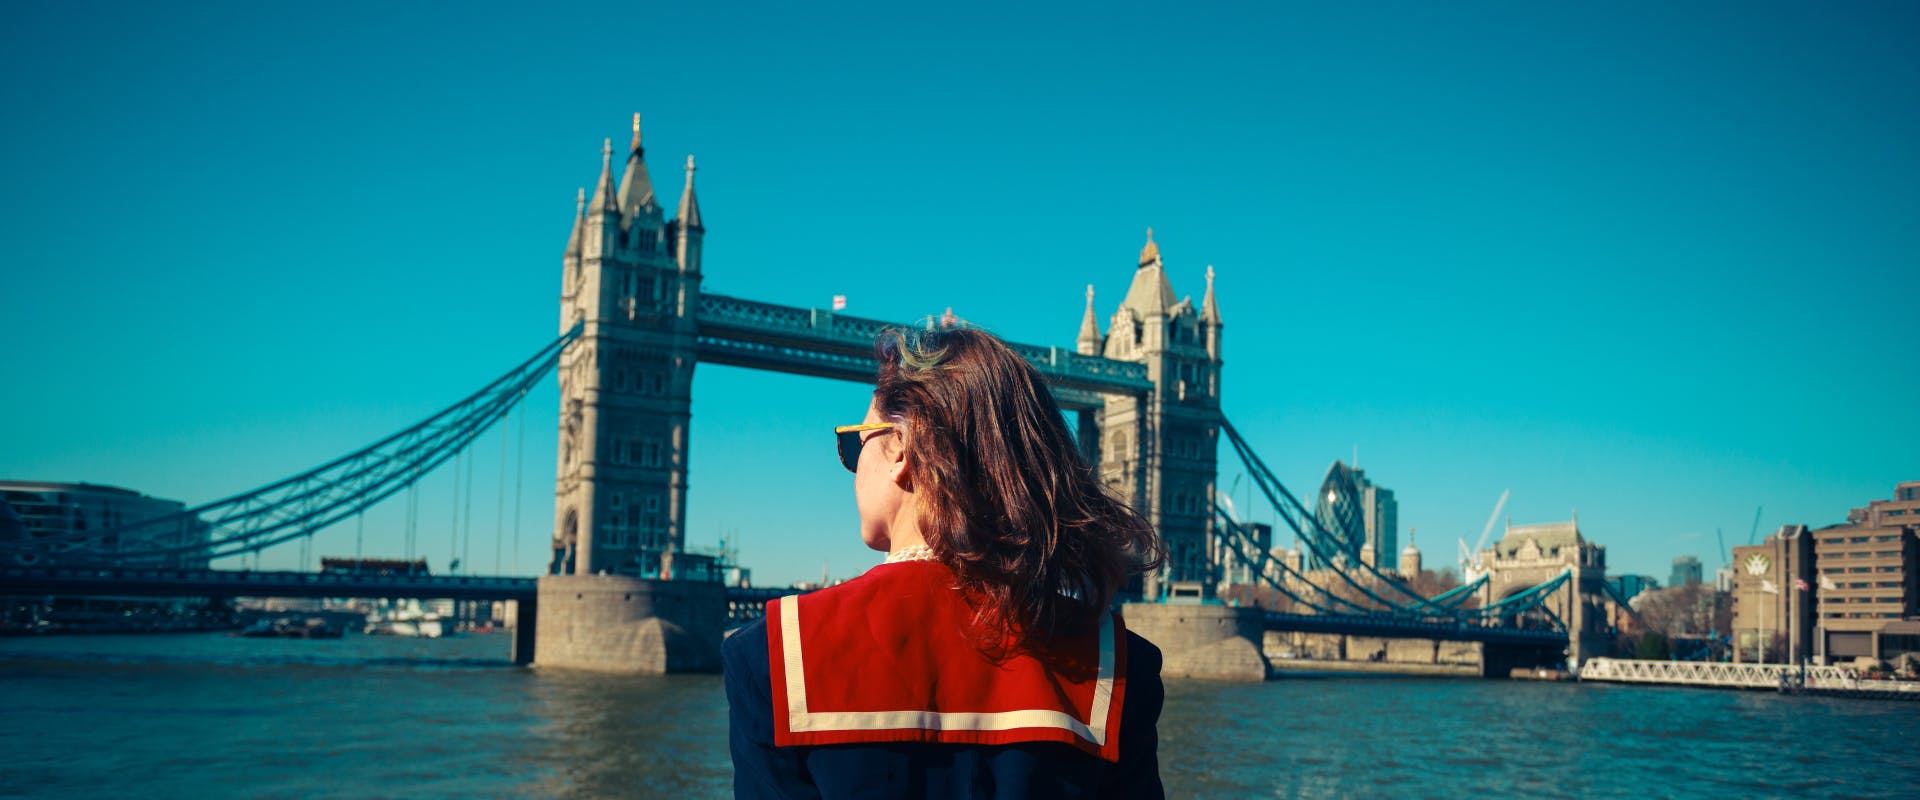 A solo female traveler in London sightseeing.  